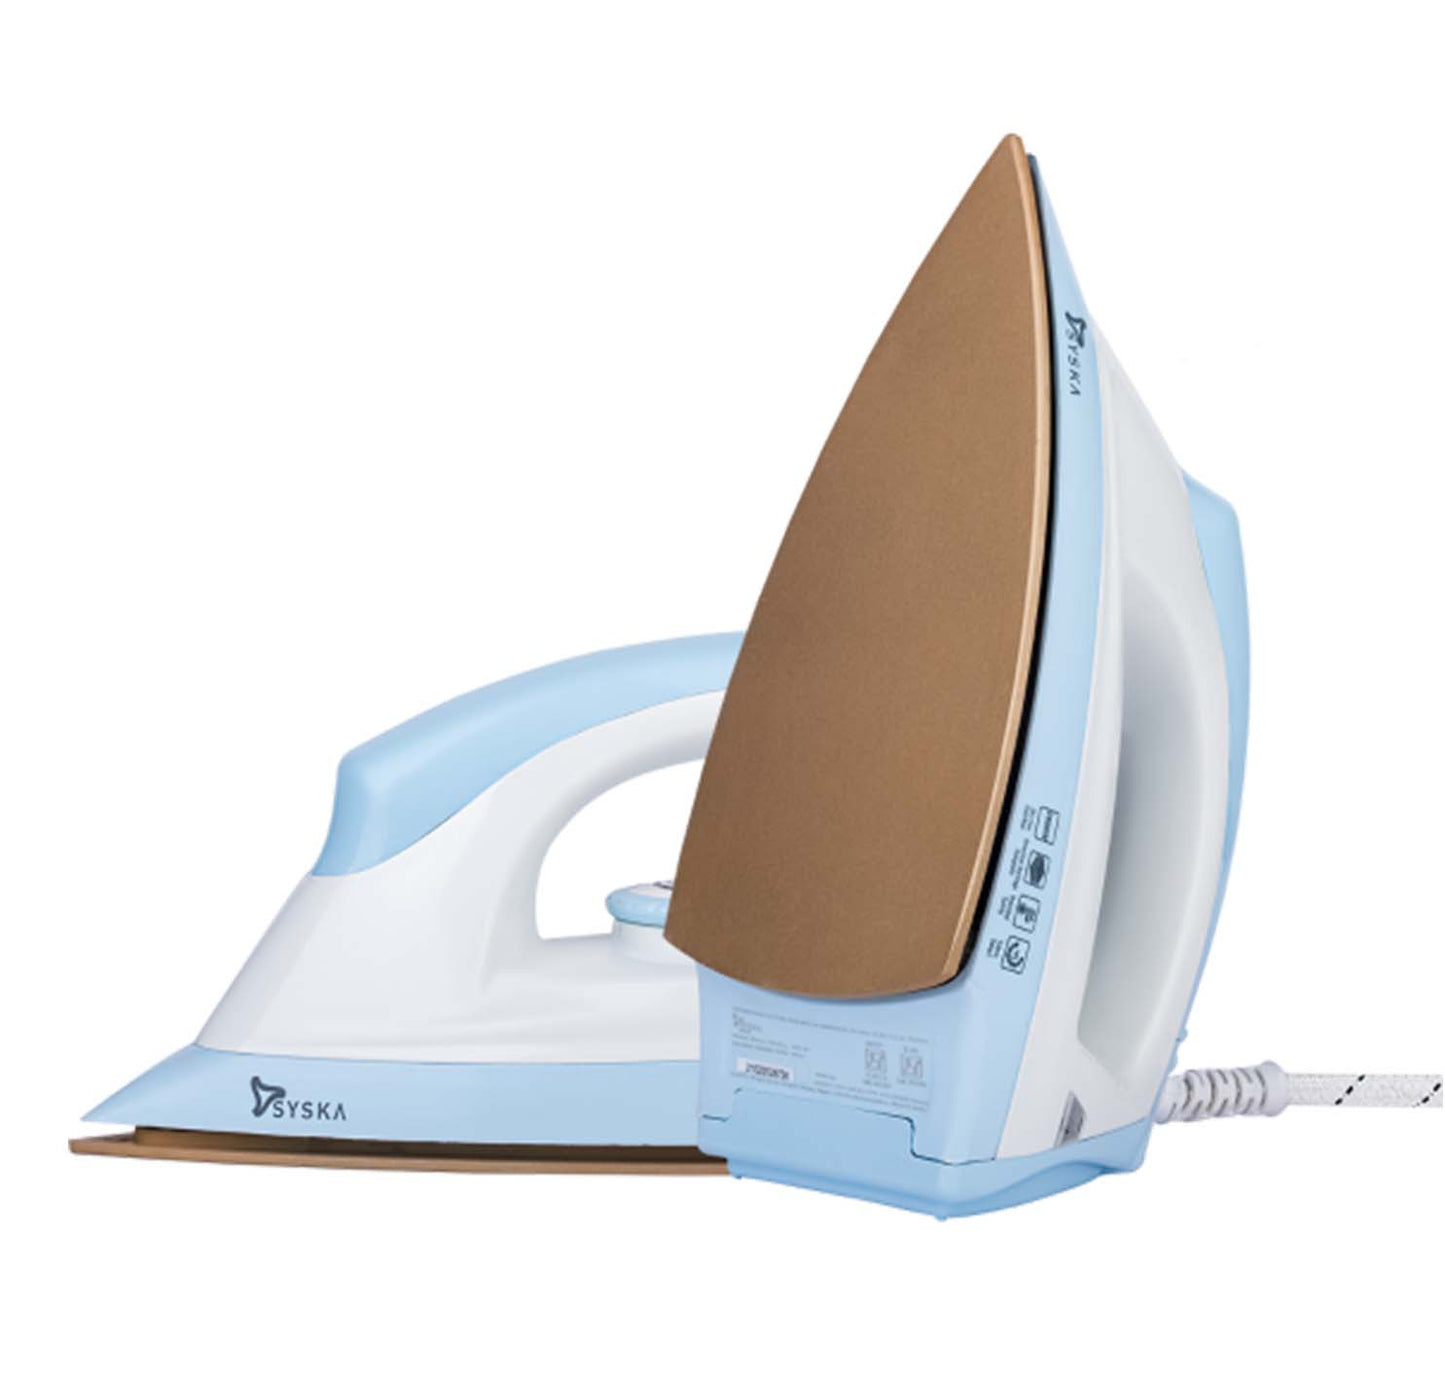 Syska Stellar Dry Iron with Golden American Heritage Soleplate Blue - 1000W